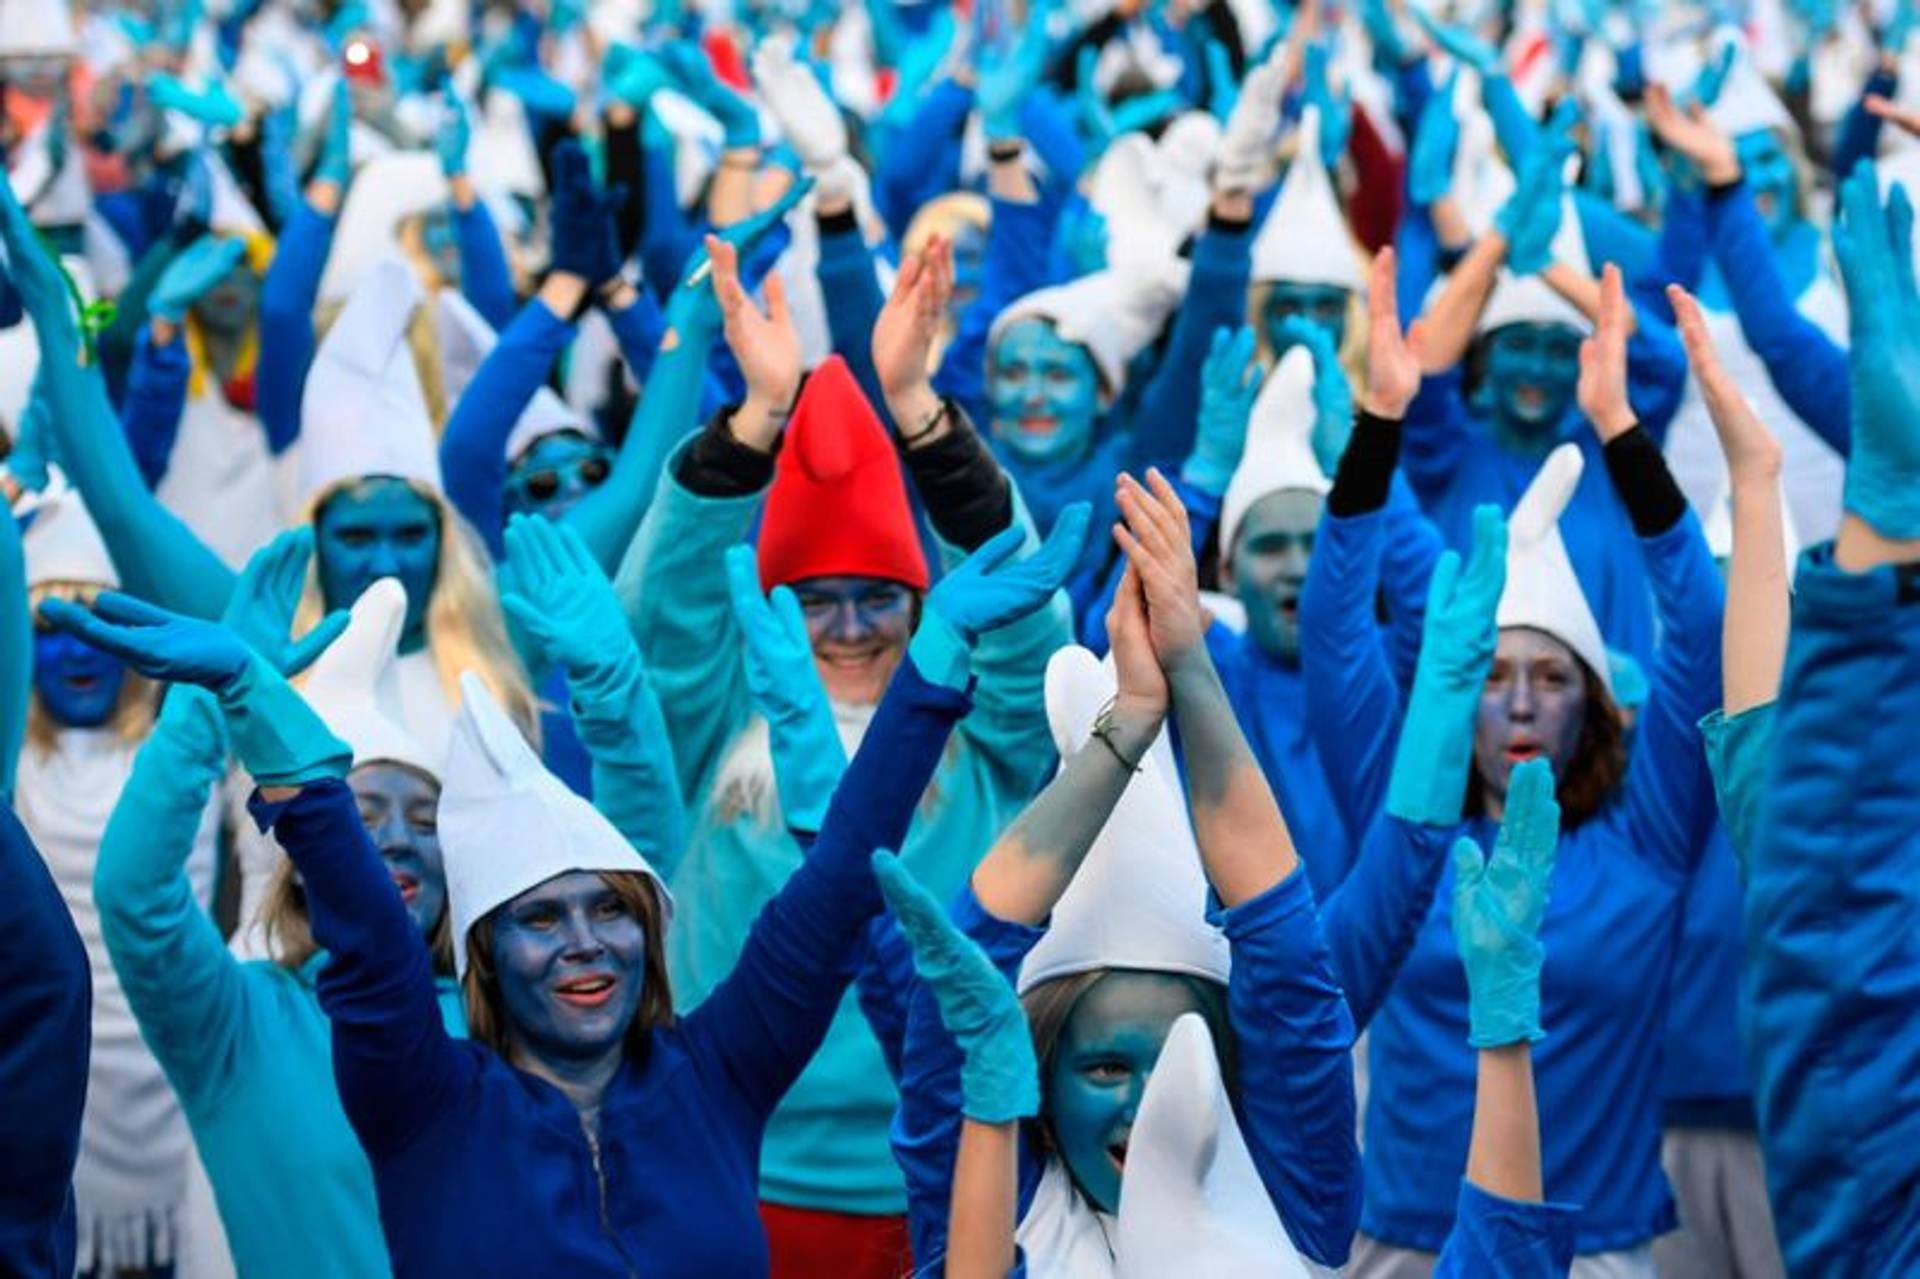 Smurf fans fight virus angst with humour and community